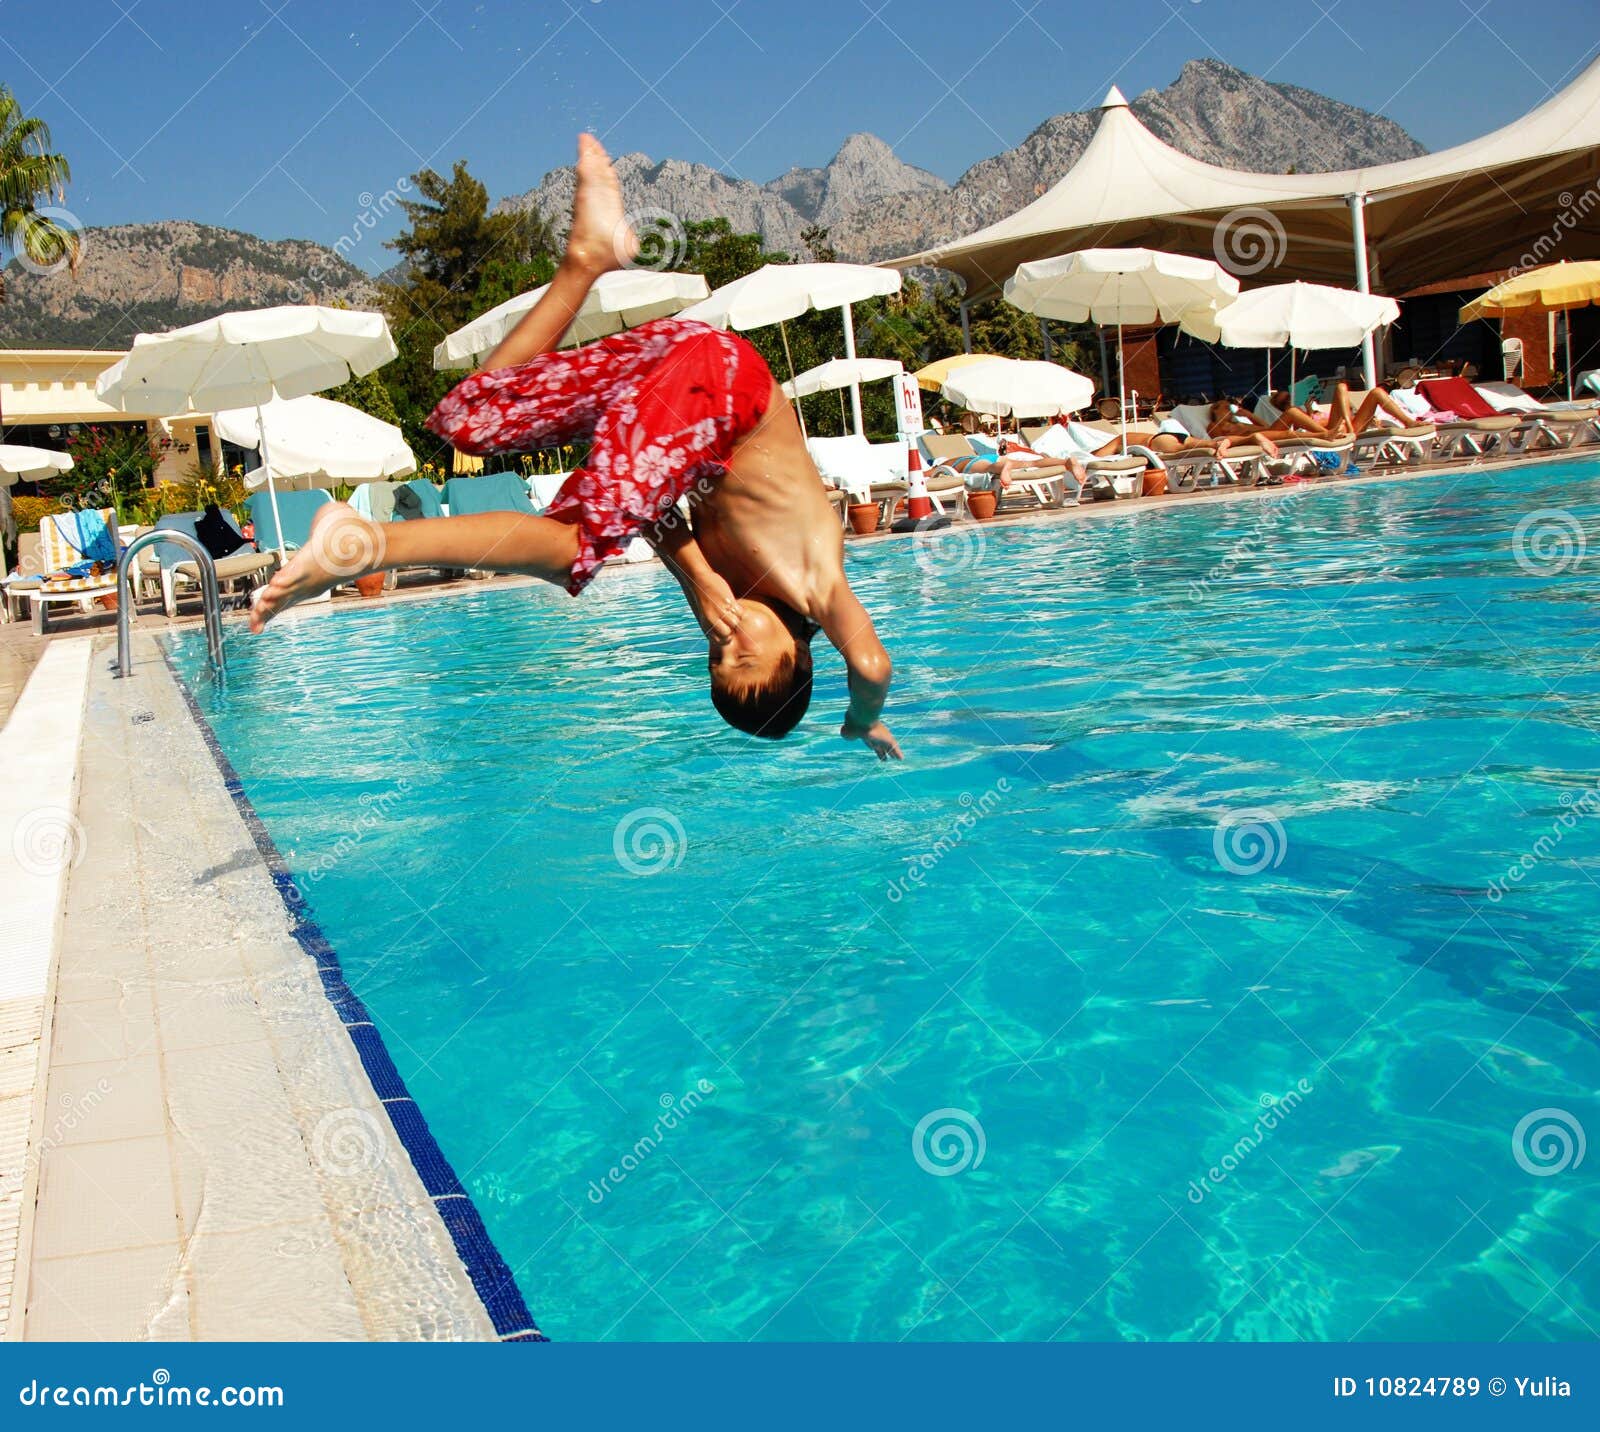 Beauty Woman Sitting On Edge Of Swimming Pool Stock Photos 